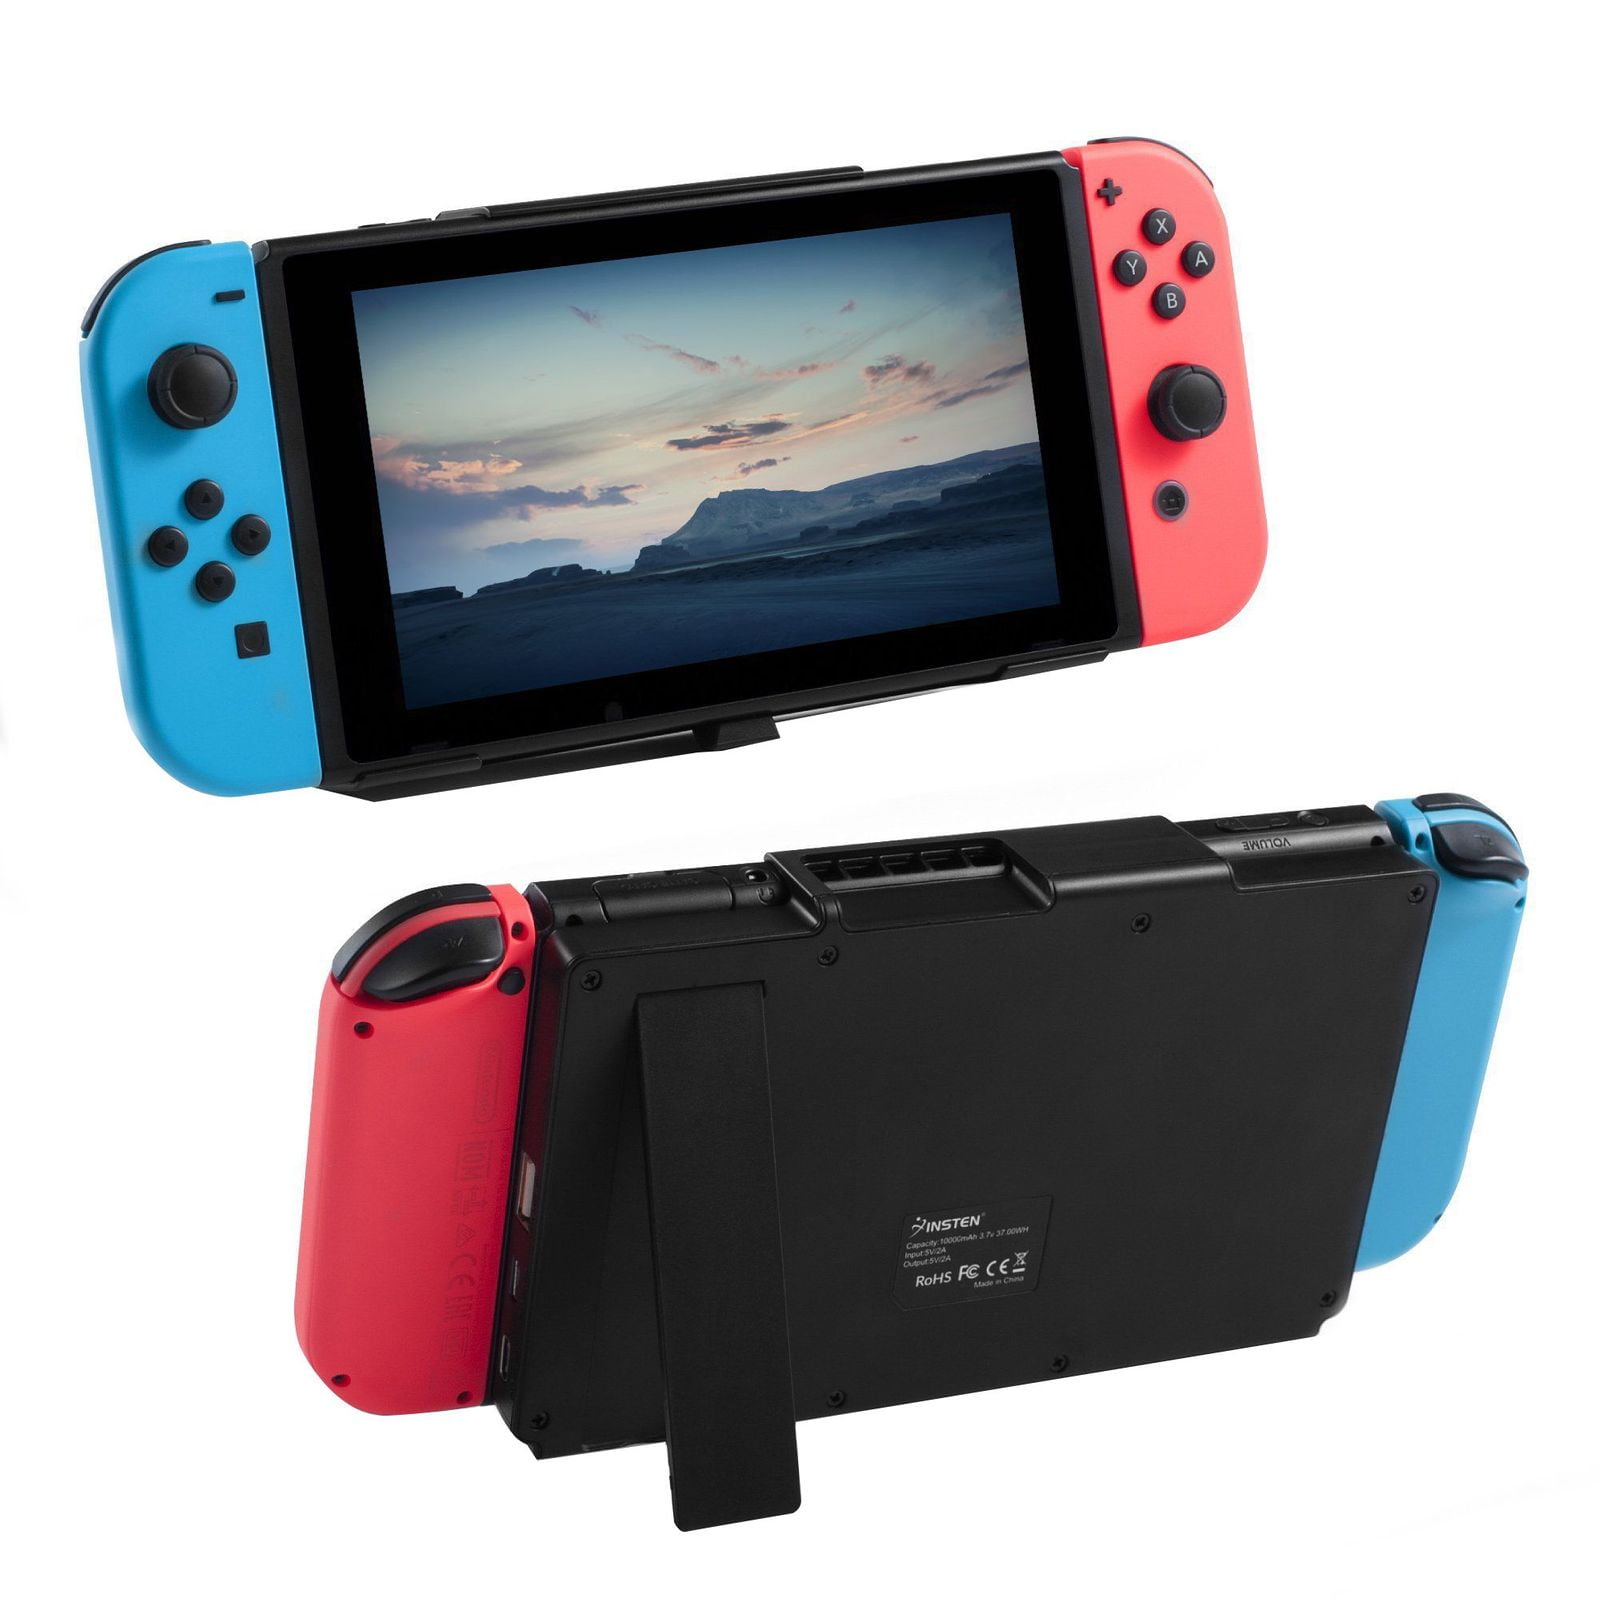 Battery Pack Case for Nintendo Switch Portable Charger, 10,000 mAh Power  Bank Charging Dock Stand with USB C Slot & Kickstand for Console -  Walmart.com